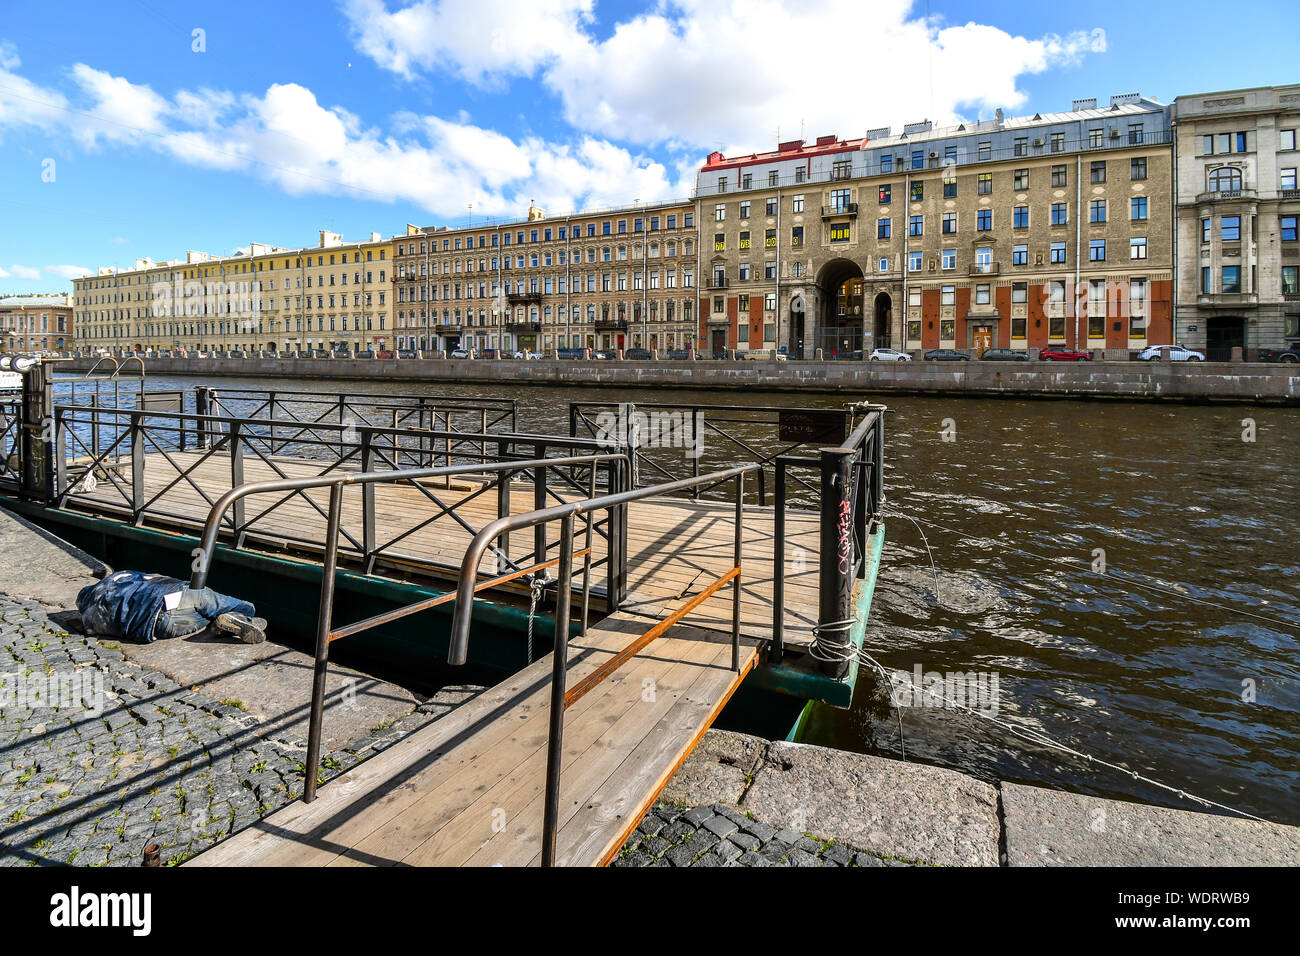 A homeless man sleeps on a sidewalk near a boat dock on the Neva River in historic St. Petersburg, Russia Stock Photo